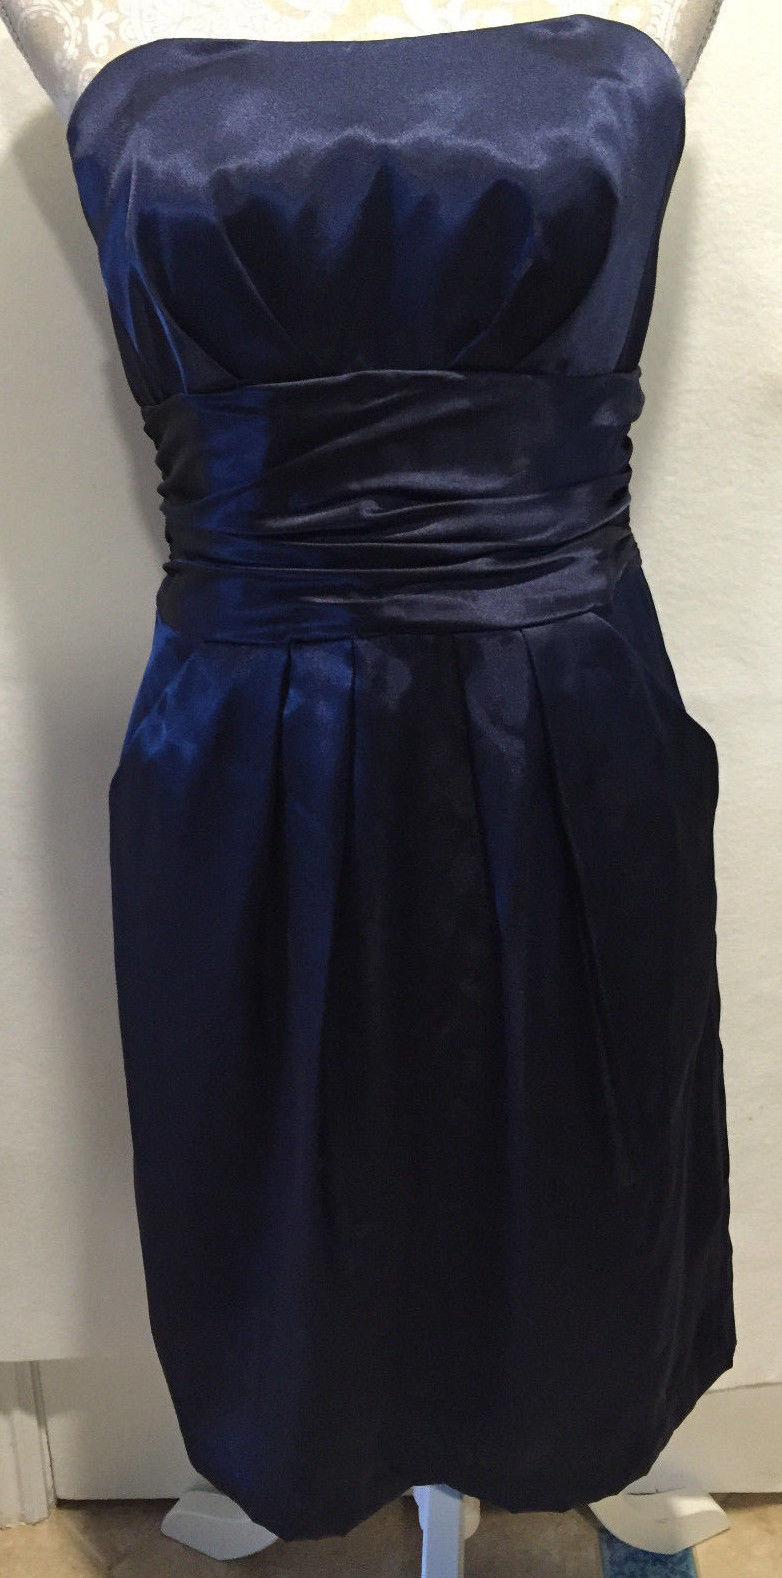 Primary image for DAVID'S BRIDAL Blue Strapless Holiday Cocktail Party Elegant Sexy Dress Size 8